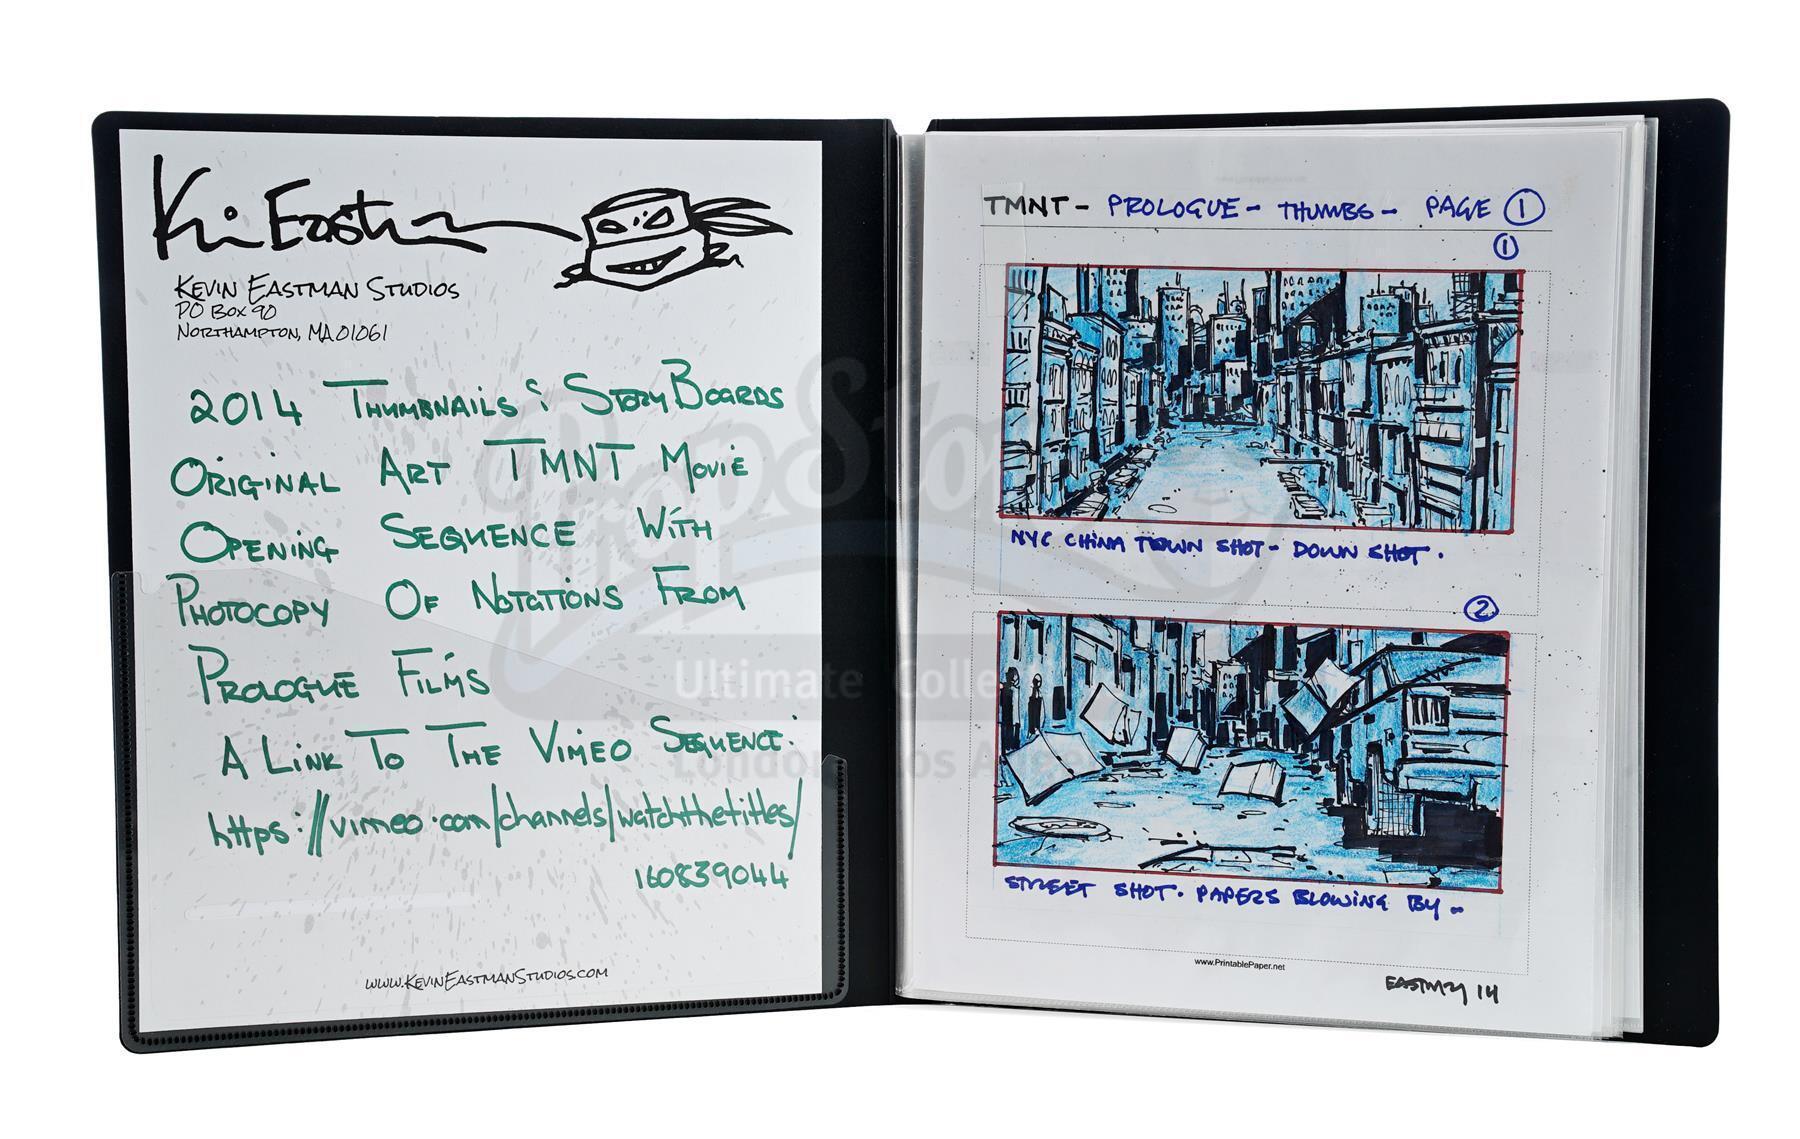 Upcoming Prop Store Auction includes My ORIGINAL ART Storyboards